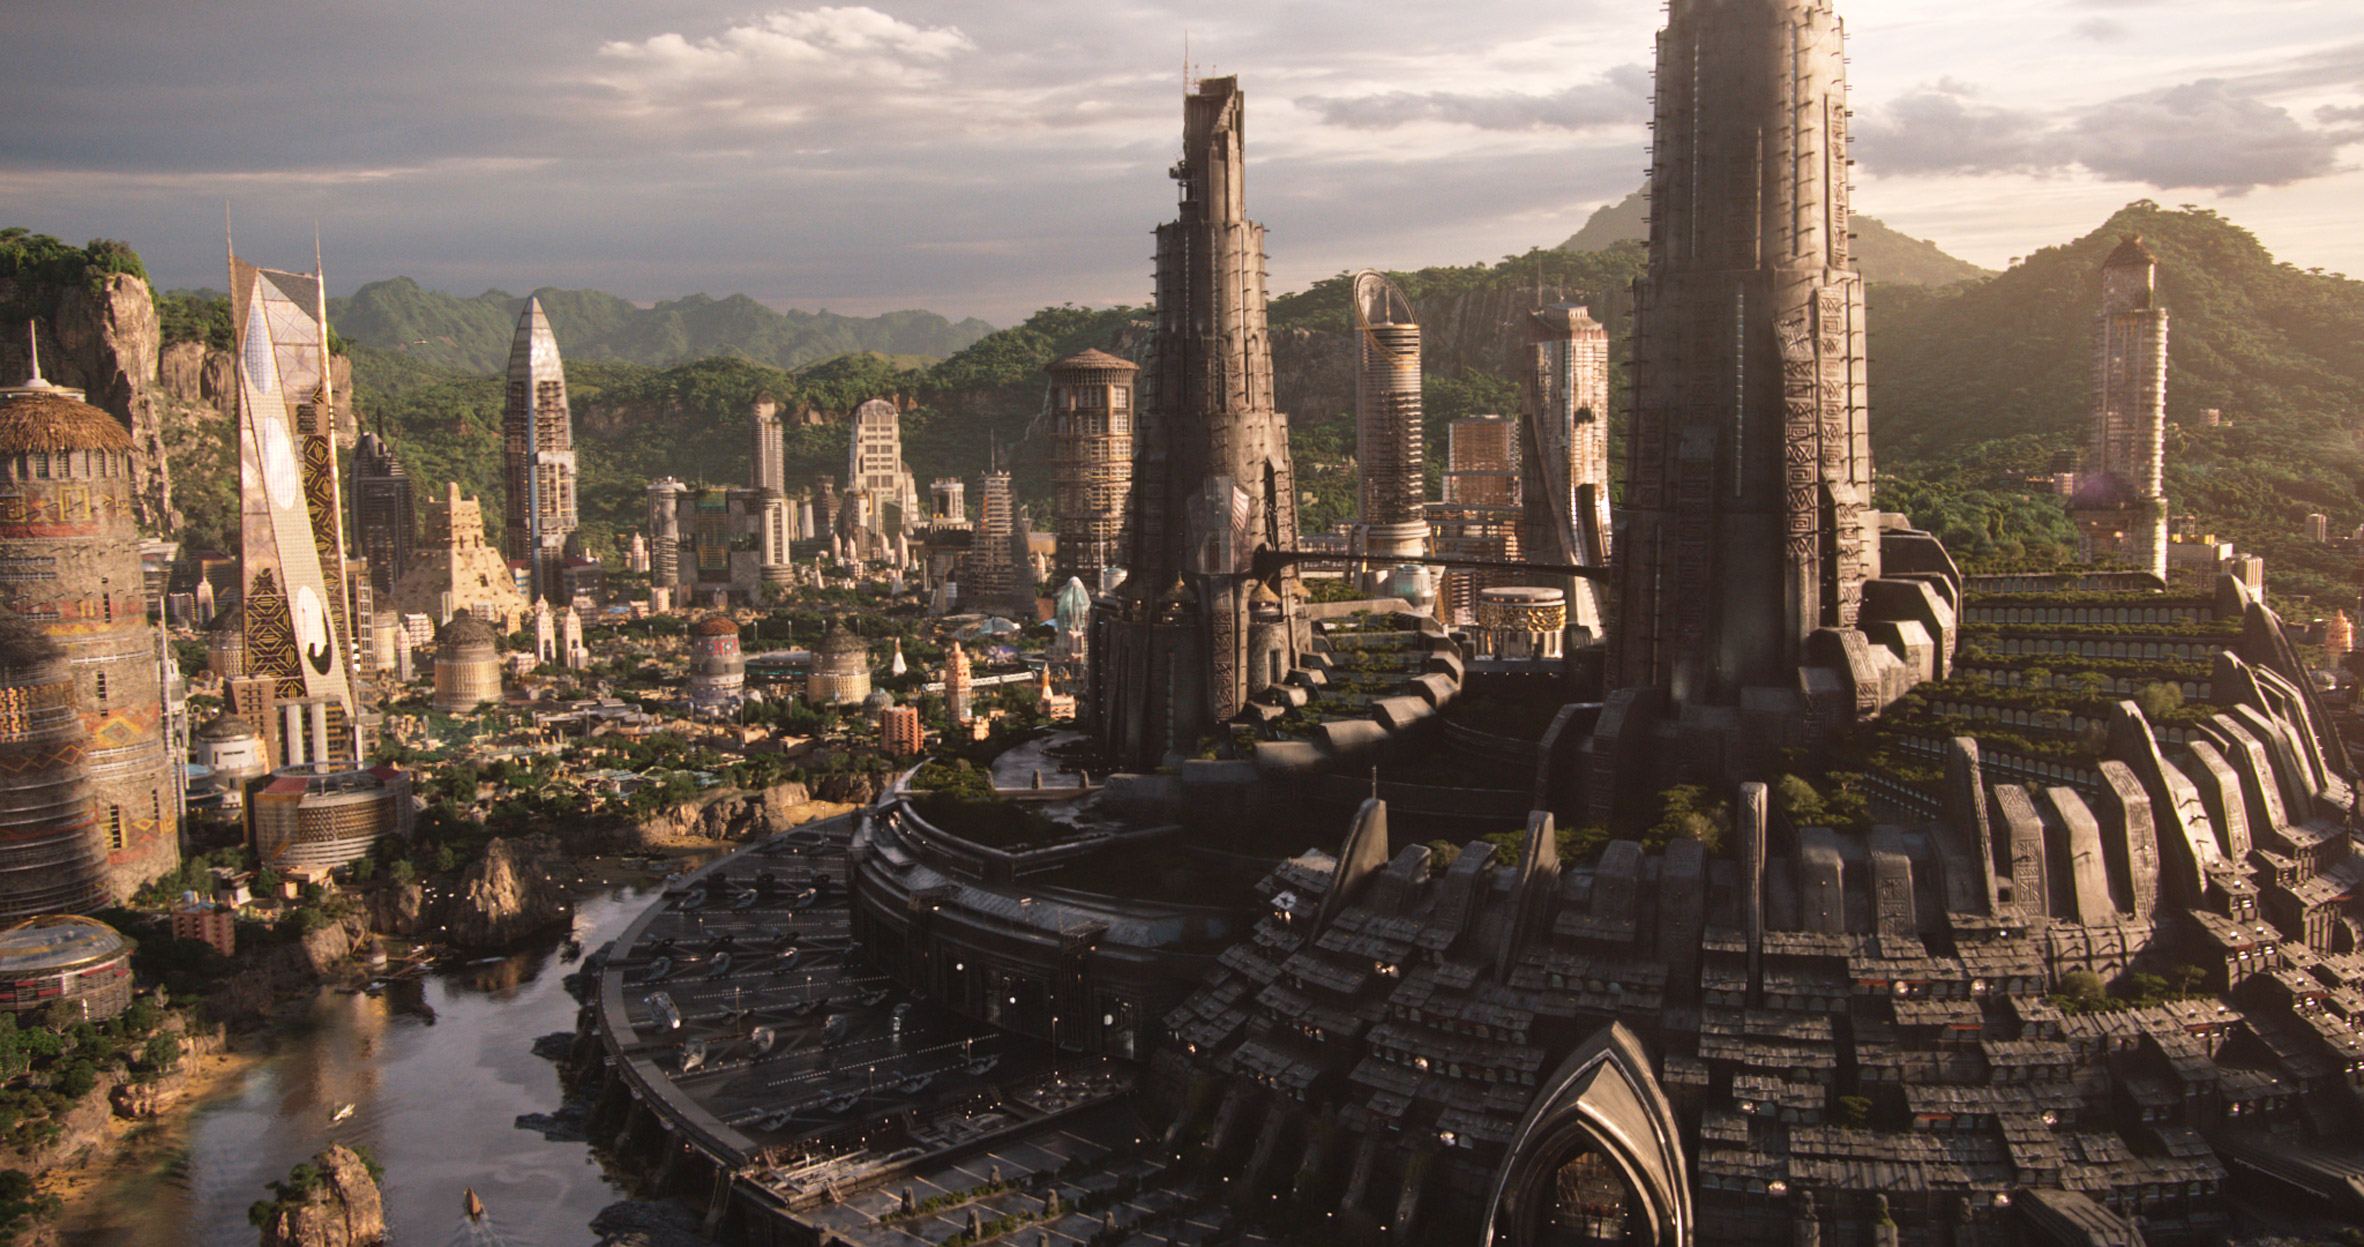 Black Panther film sets are influenced by Zaha Hadid, says designer